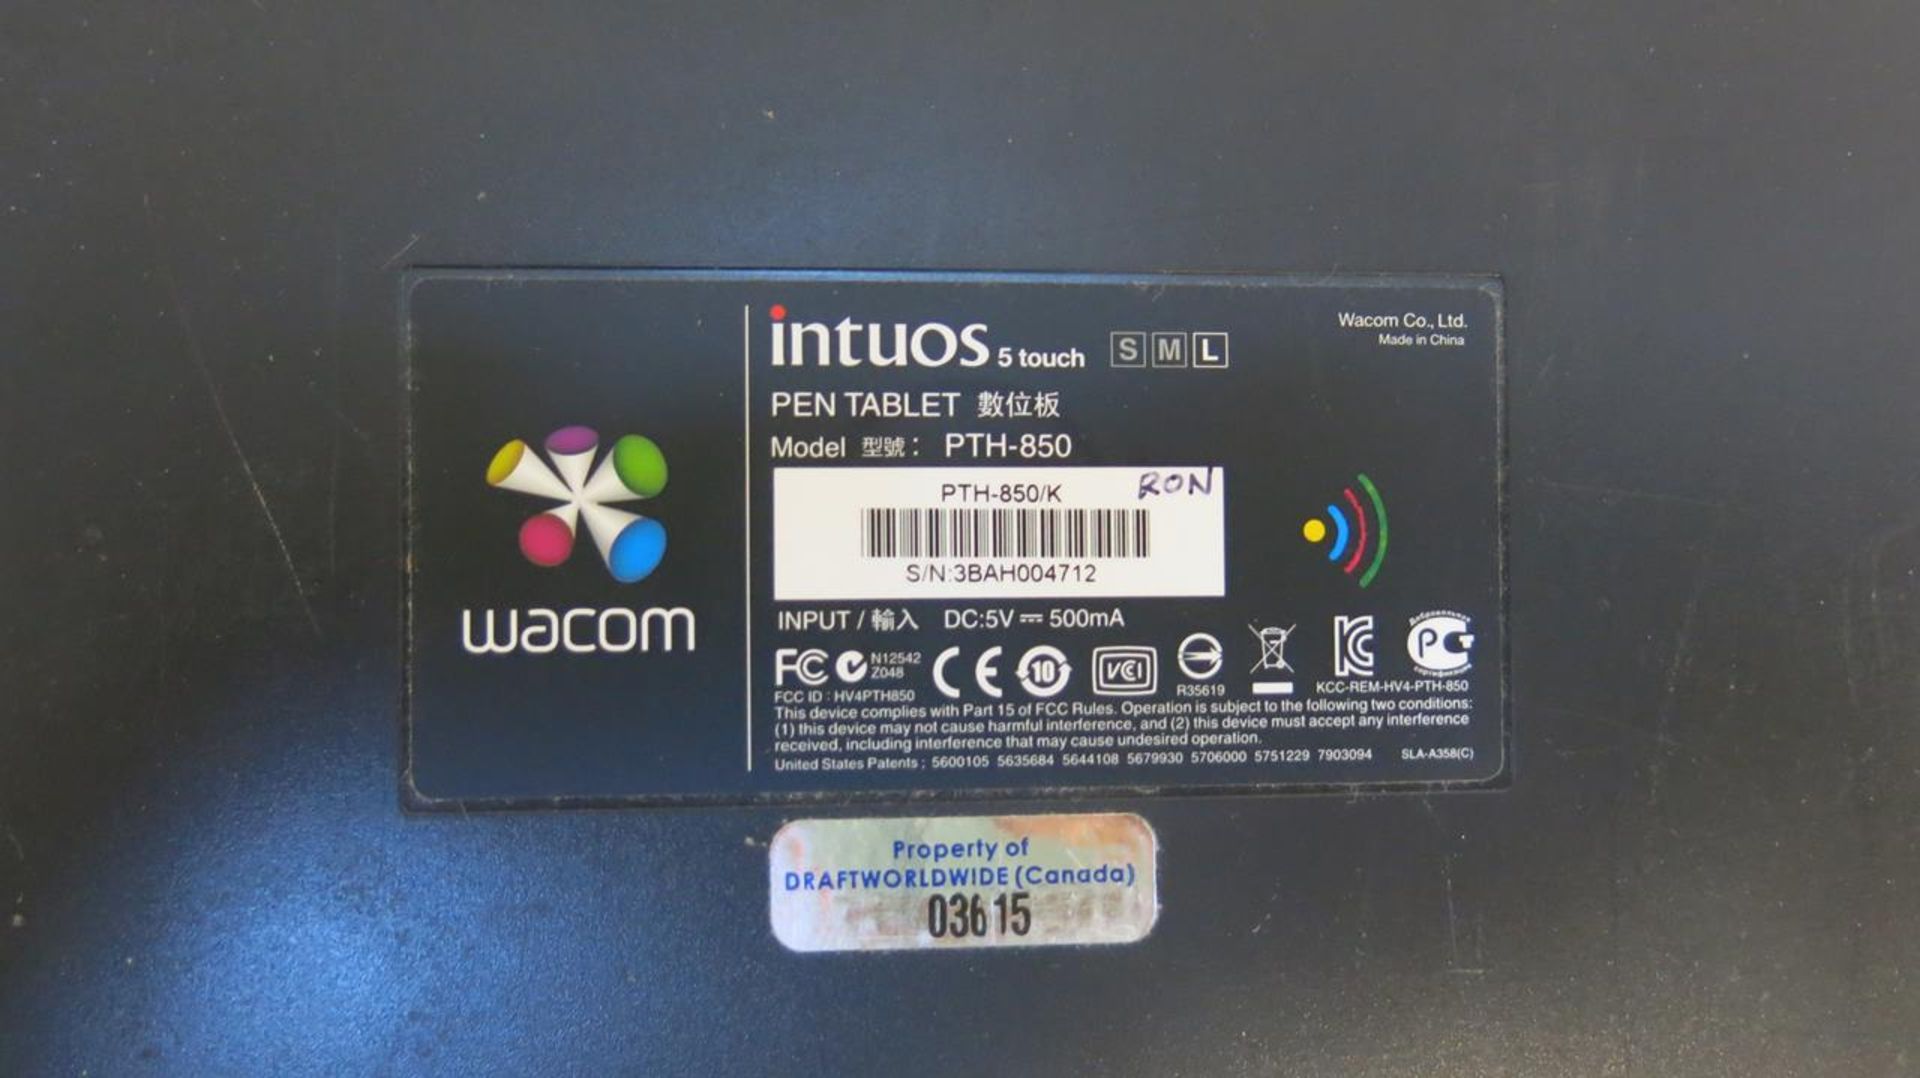 WACOM, PTH-850, INTUOS5, LARGE, TOUCH PEN TABLET, S/N 3BAH004712 - Image 3 of 3